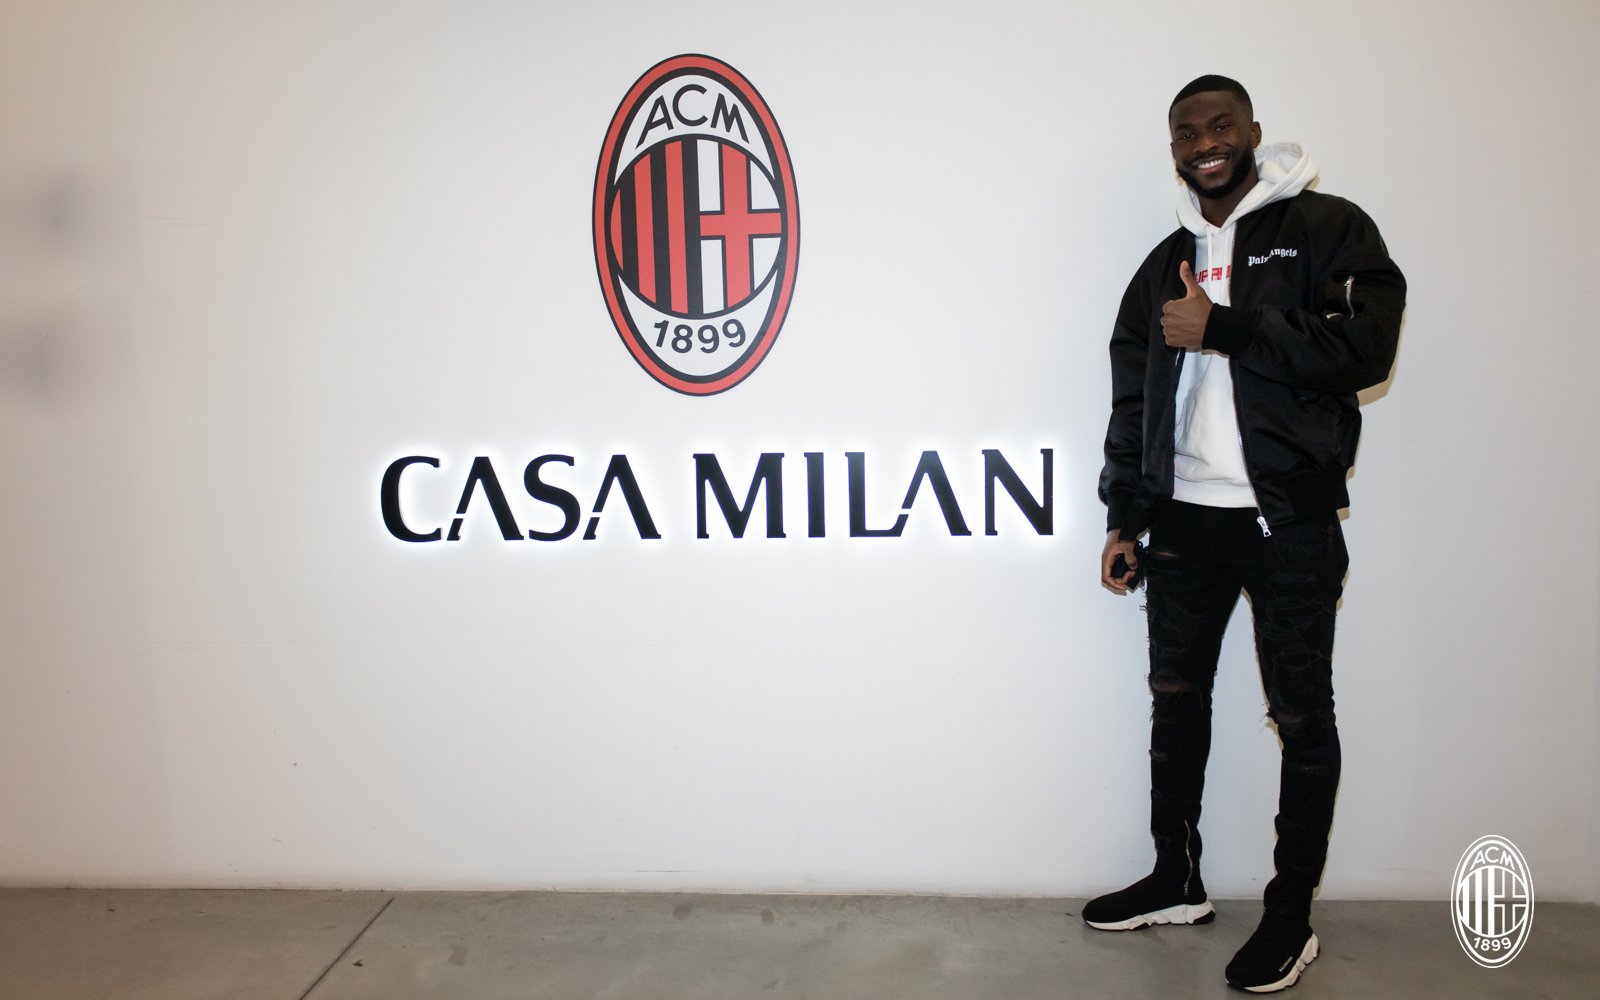 Milan are keeping busy: A loan with an option to sign for €30,000,000 arrives!